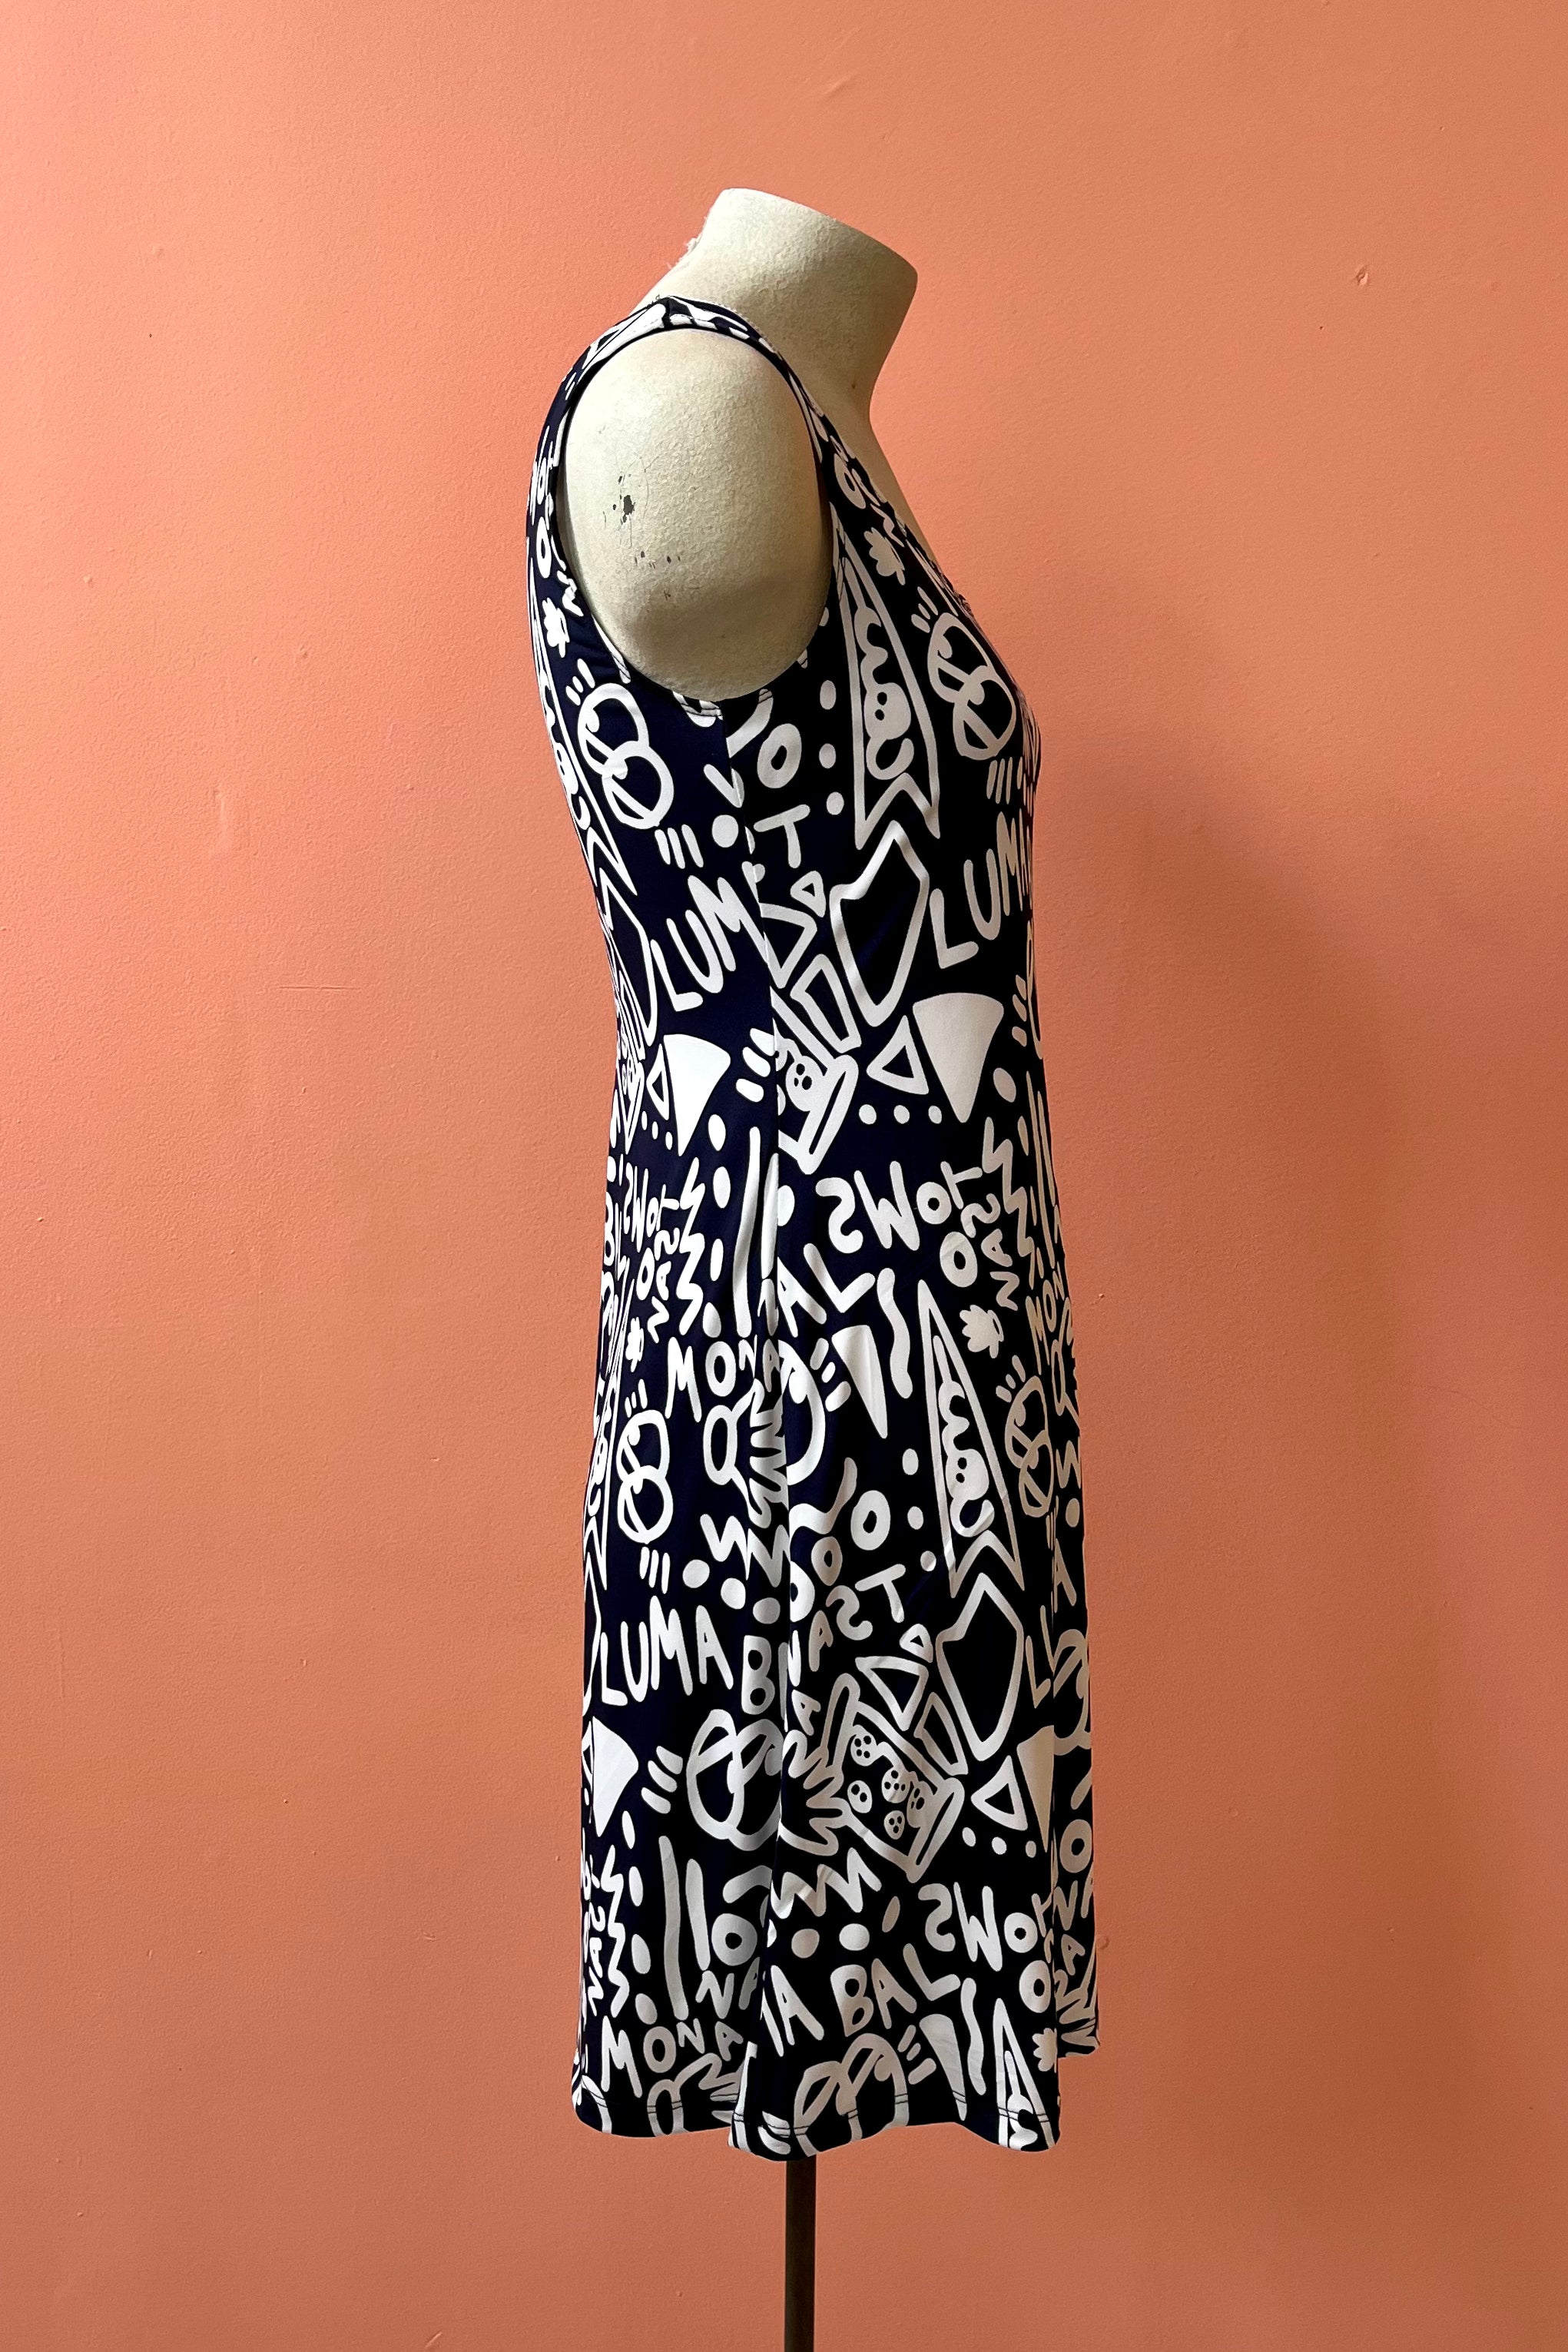 Phillips Dress by Yul Voy, black and white graffiti print, side view, scooped neck front and back, tank dress, wide straps, fit and flare shape, above the knee, sizes XS to XXL, made in Montreal